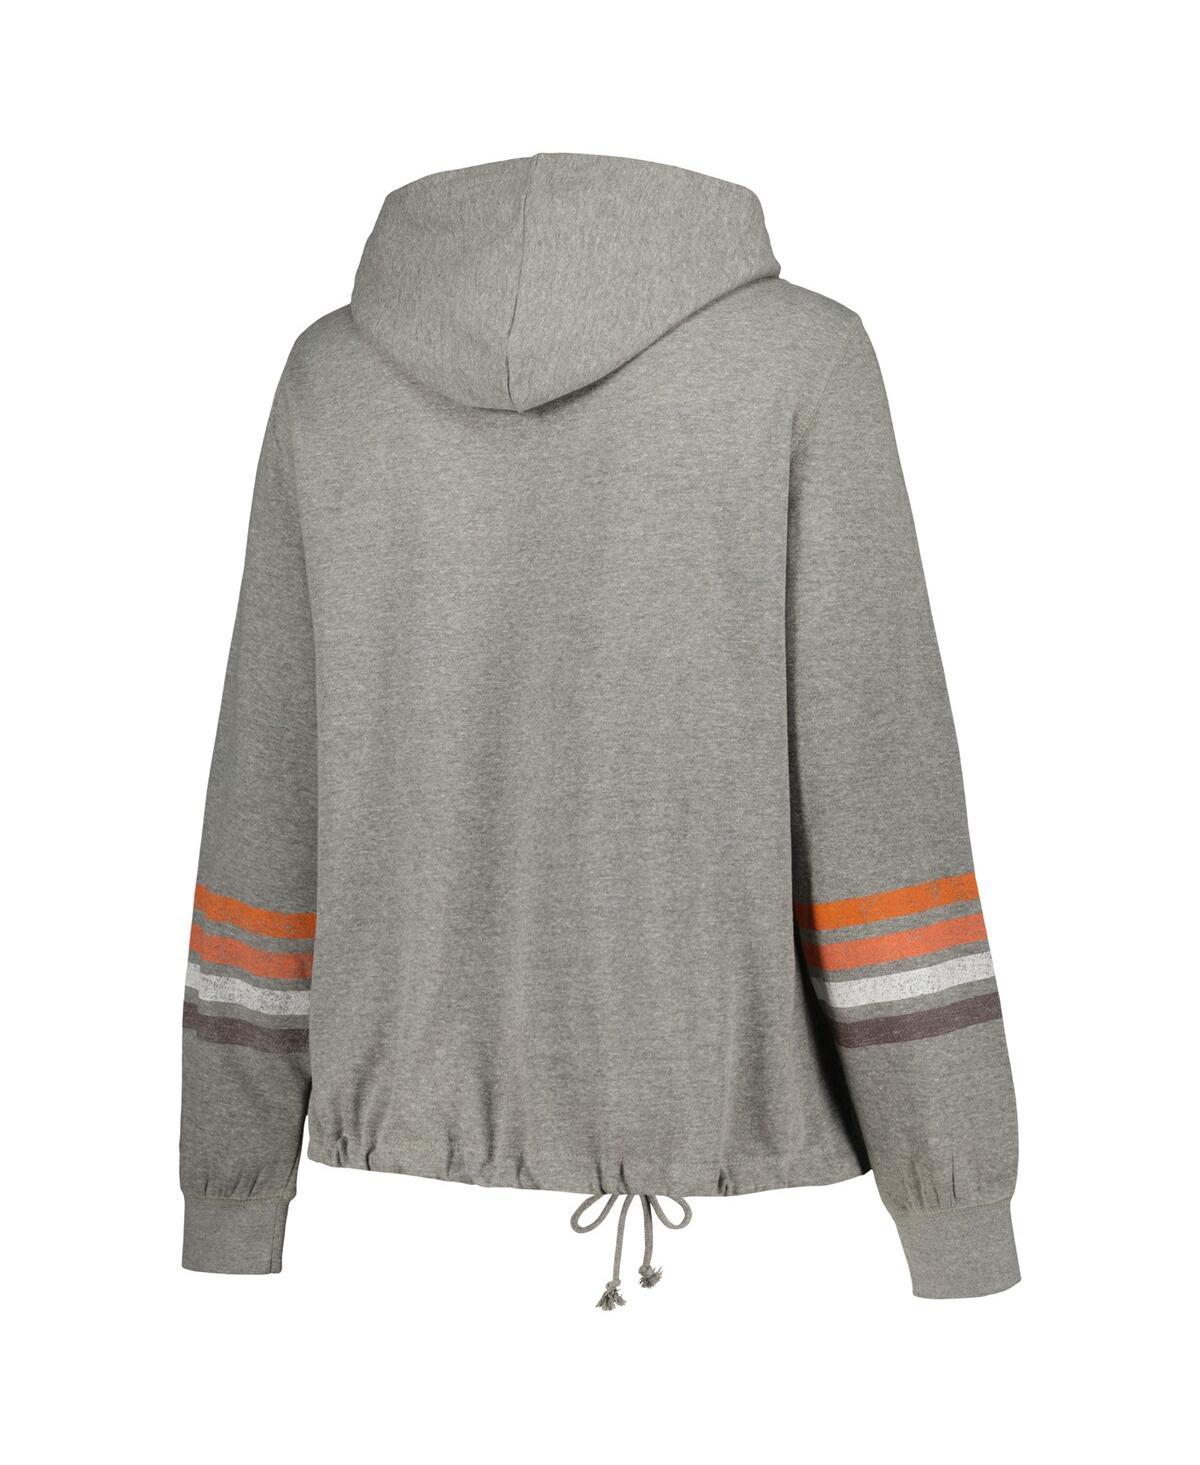 Shop 47 Brand Women's ' Heather Gray Distressed Cleveland Browns Plus Size Upland Bennett Pullover Hoodie